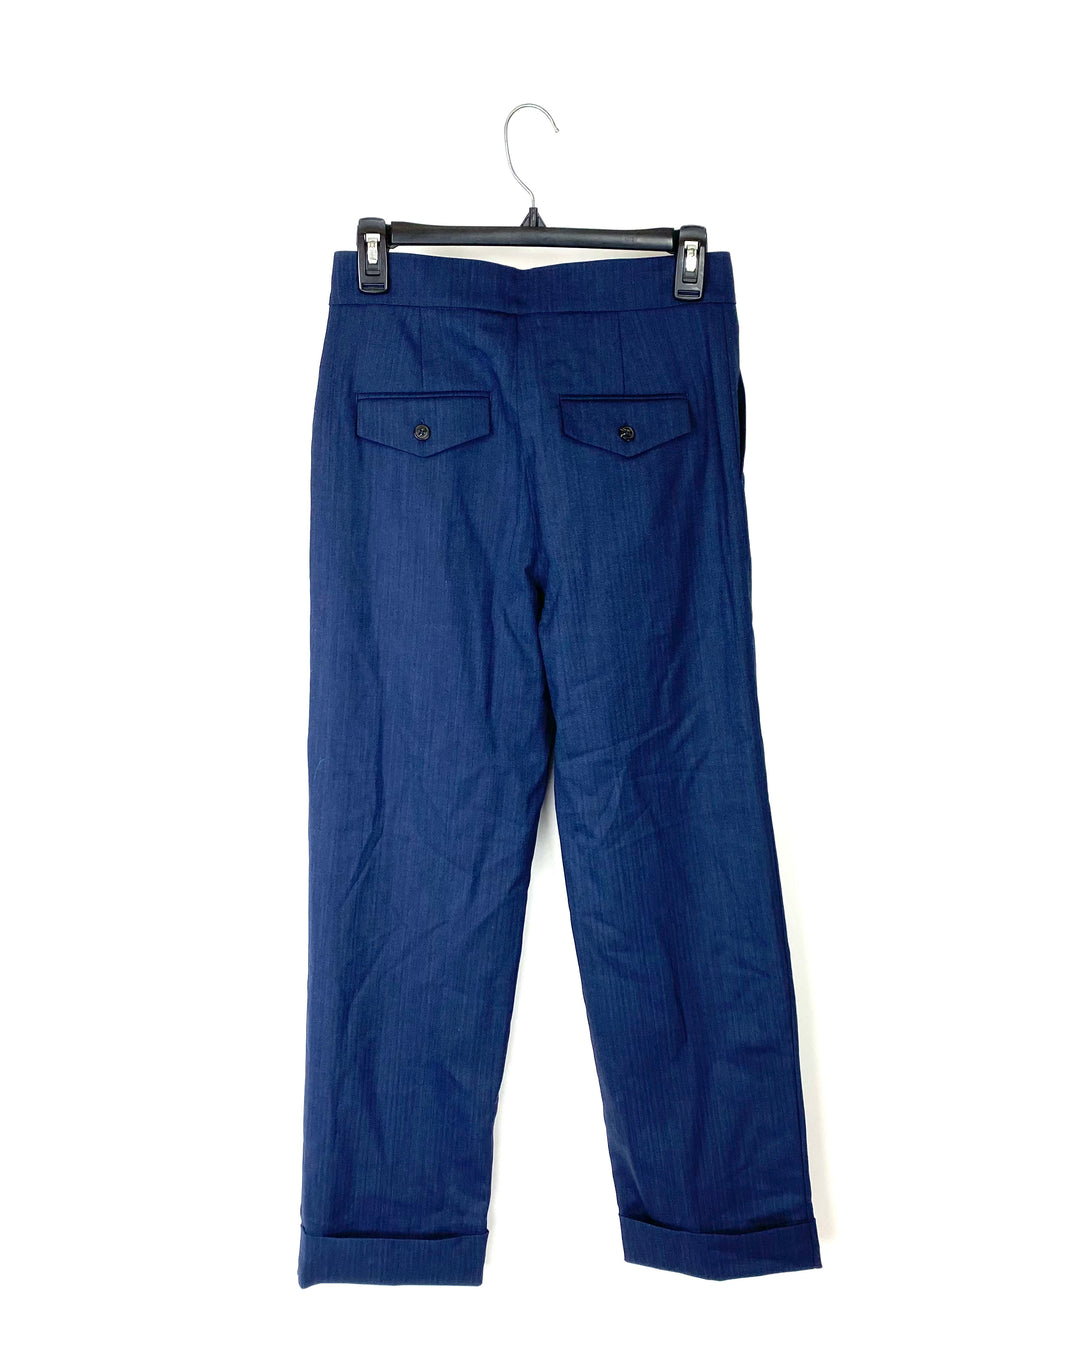 Navy Blue Tapered Ankle Trousers - Size 4 and 6